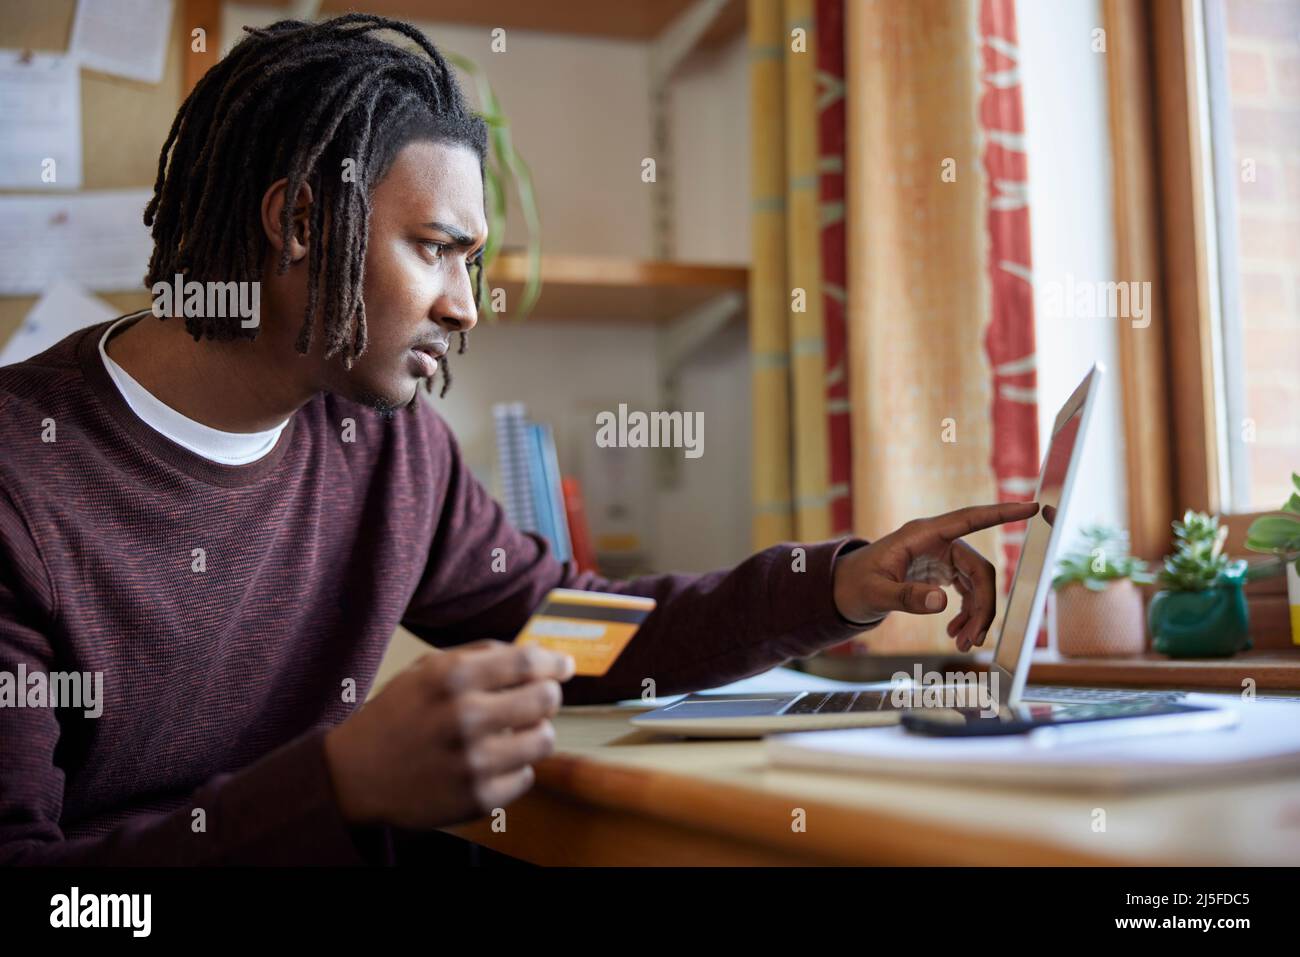 Male University Or College Student With Credit Card Looking At Laptop Worried About Debt At Desk In Room Stock Photo